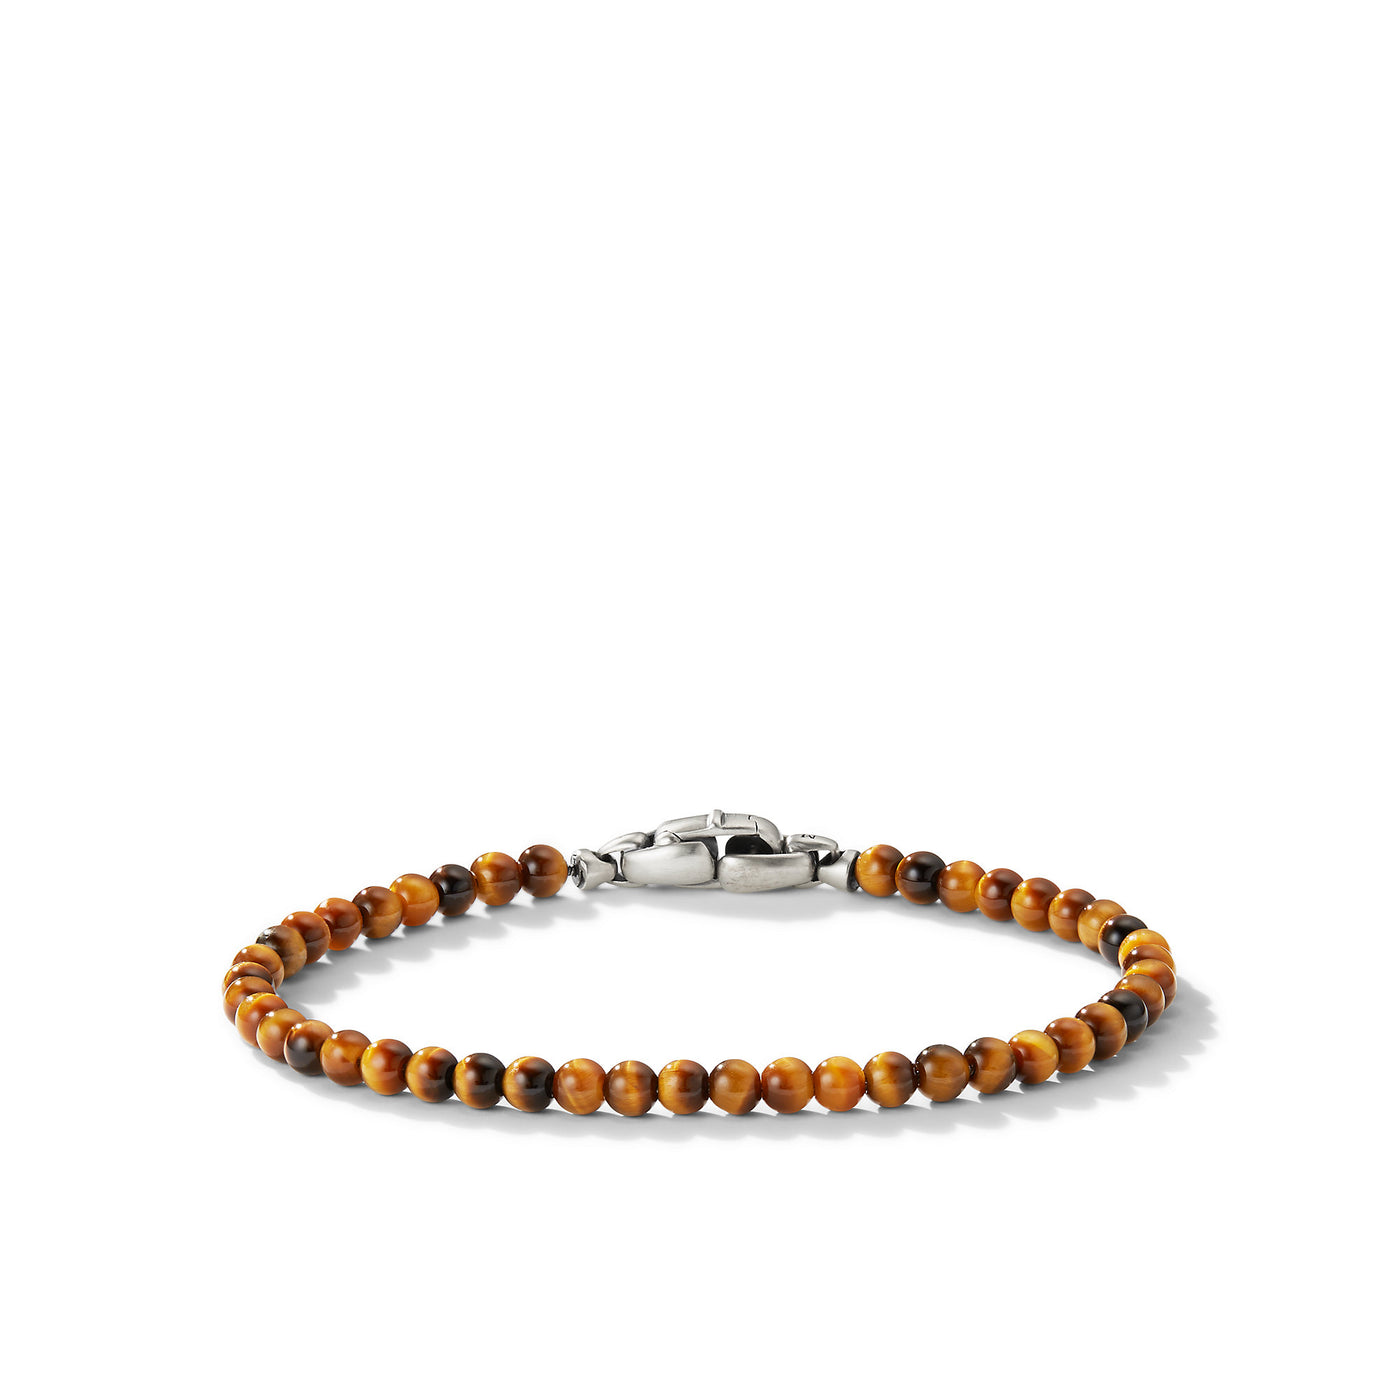 Spiritual Beads Bracelet in Tigers Eye with Sterling Silver\, 4mm